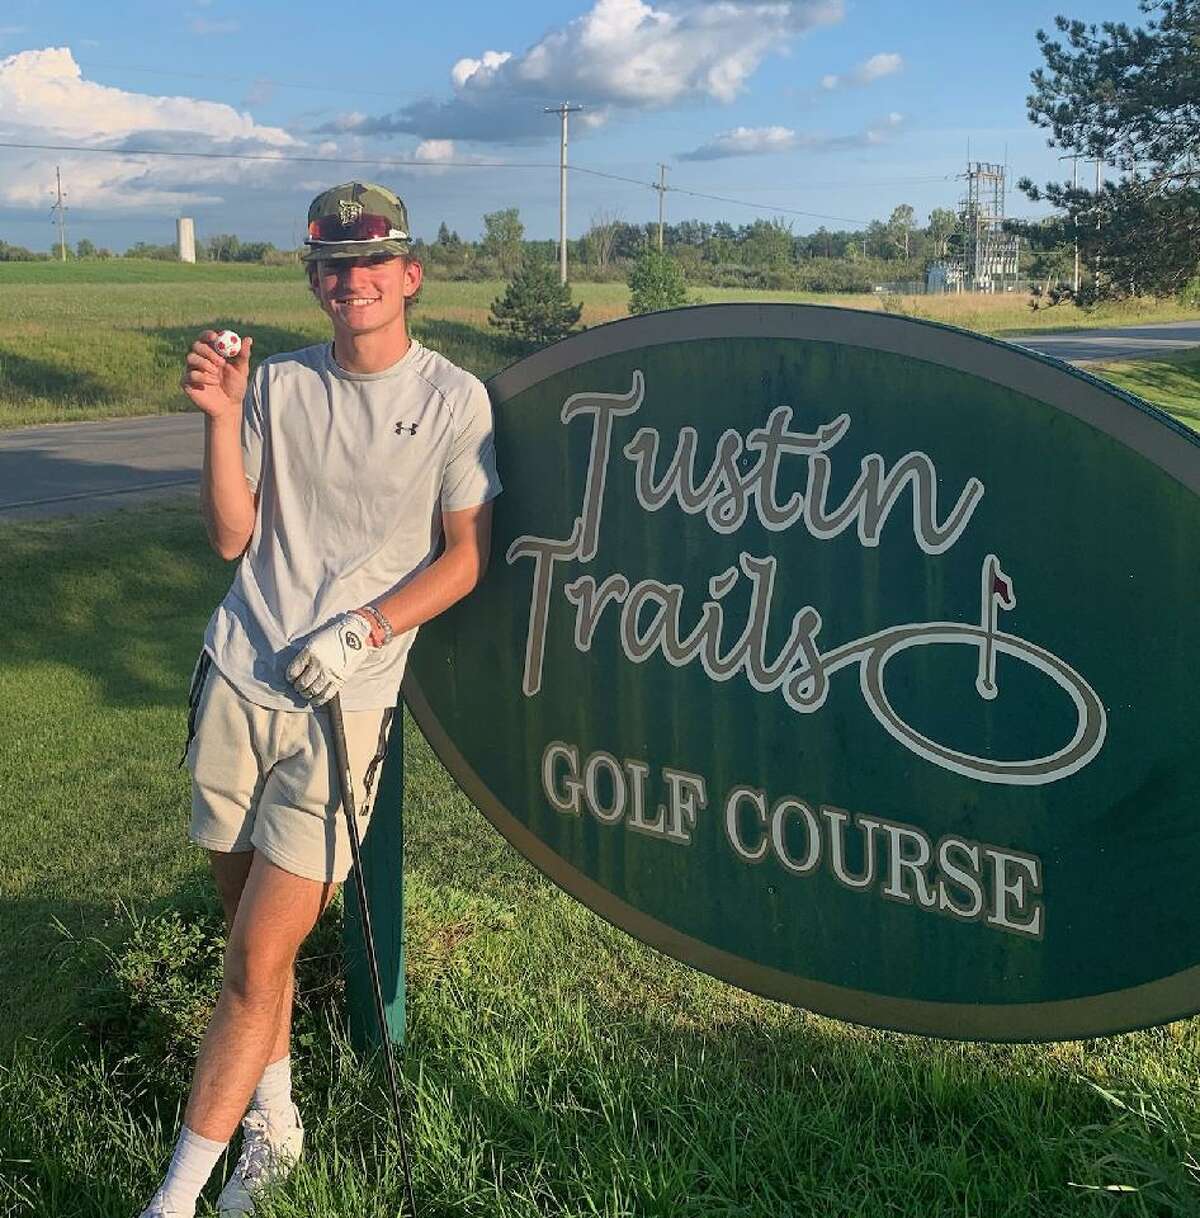 Pine River senior Austin Dean holds the ball which he used to shoot a double eagle at Tustin Trails Golf Course on Aug. 16.